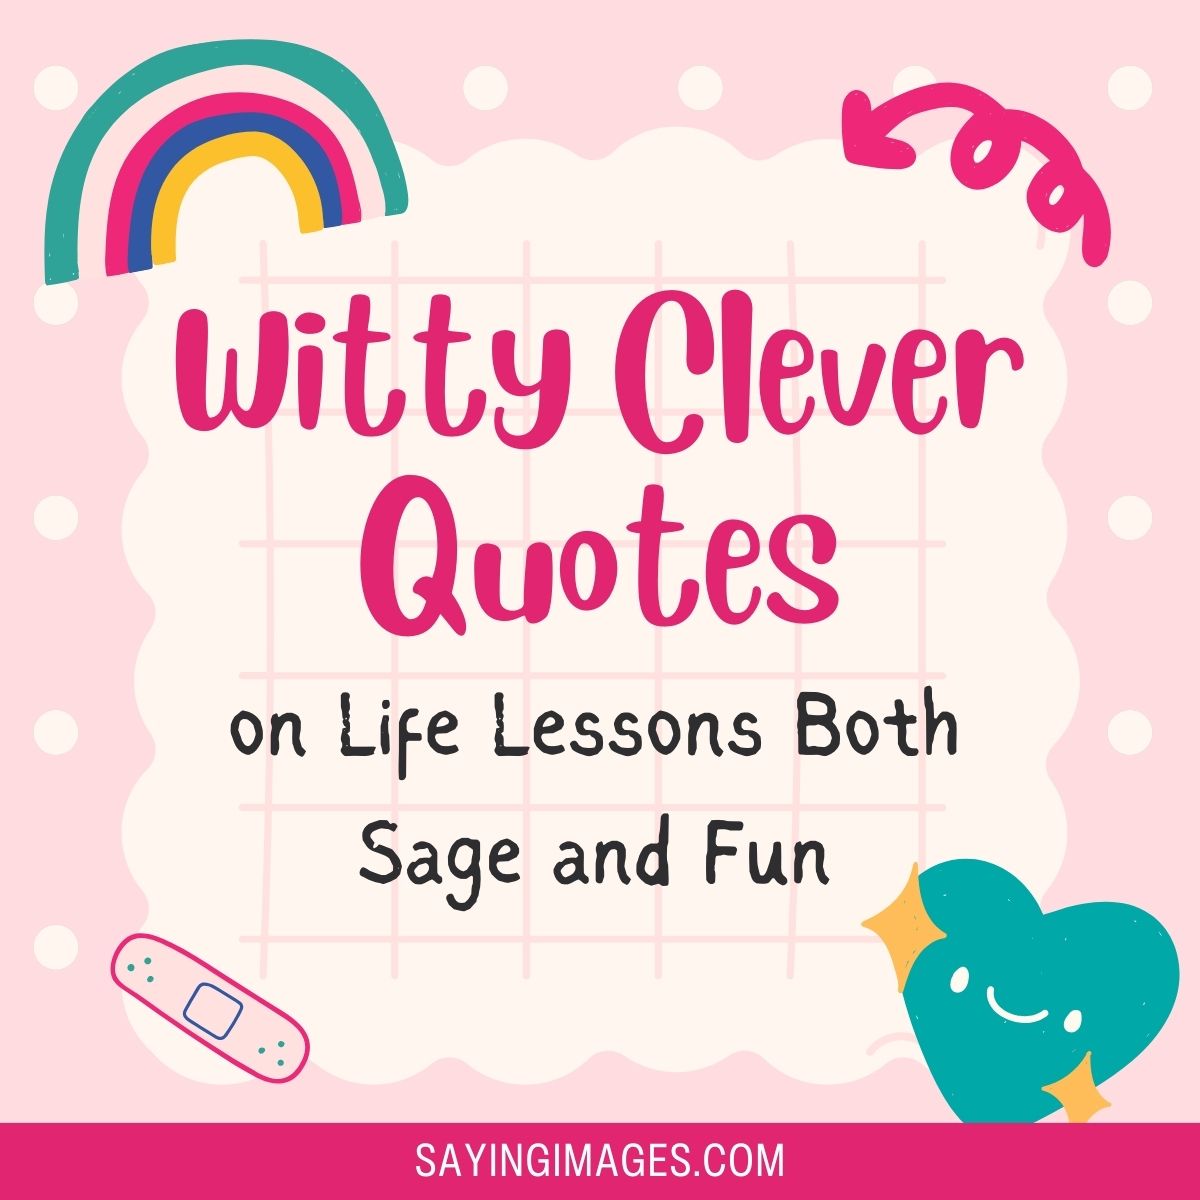 43 Witty Clever Quotes on Life Lessons Both Sage and Fun